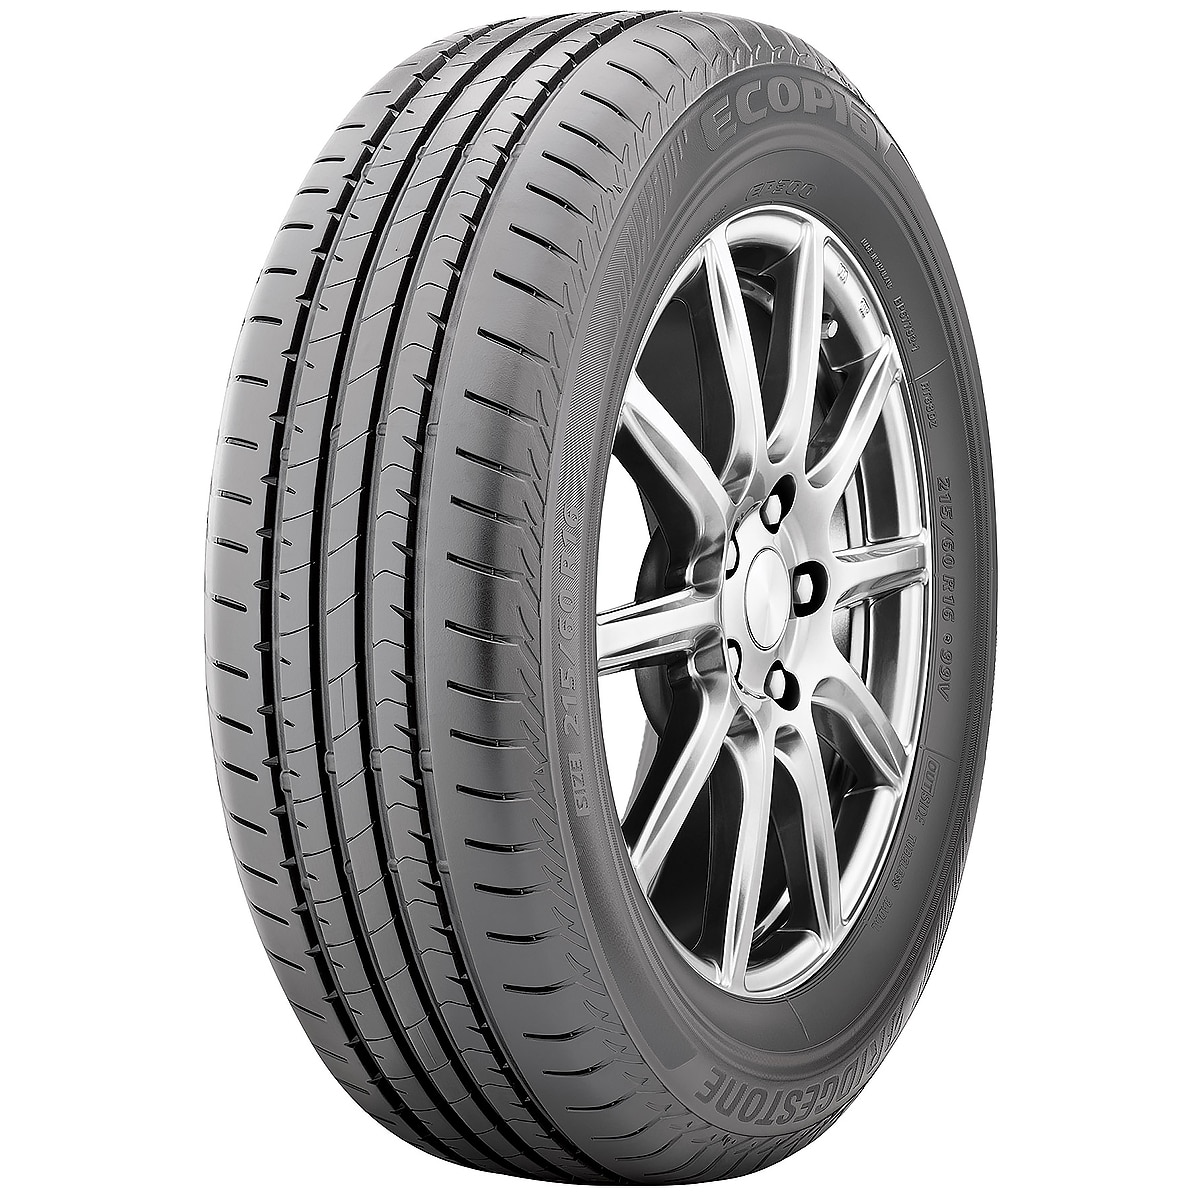 215/50R17 91V BS EP300 - tyre